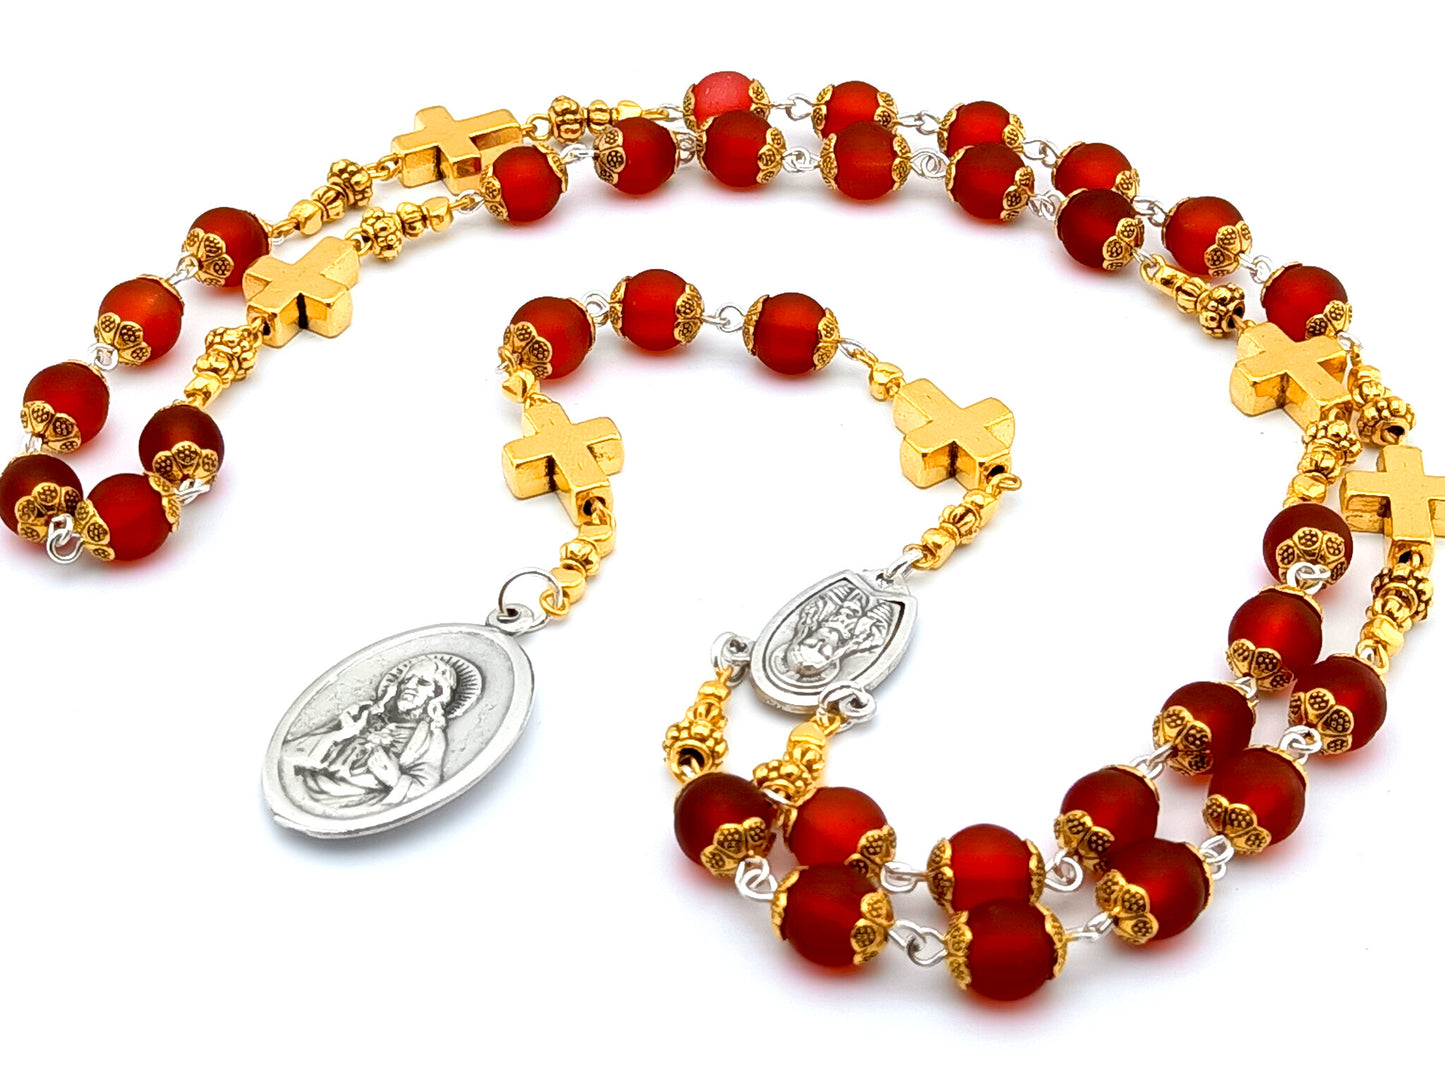 Sacred Heart of Jesus unique rosary beads prayer chaplet with red glass and golden cross beads, silver centre and end medals.